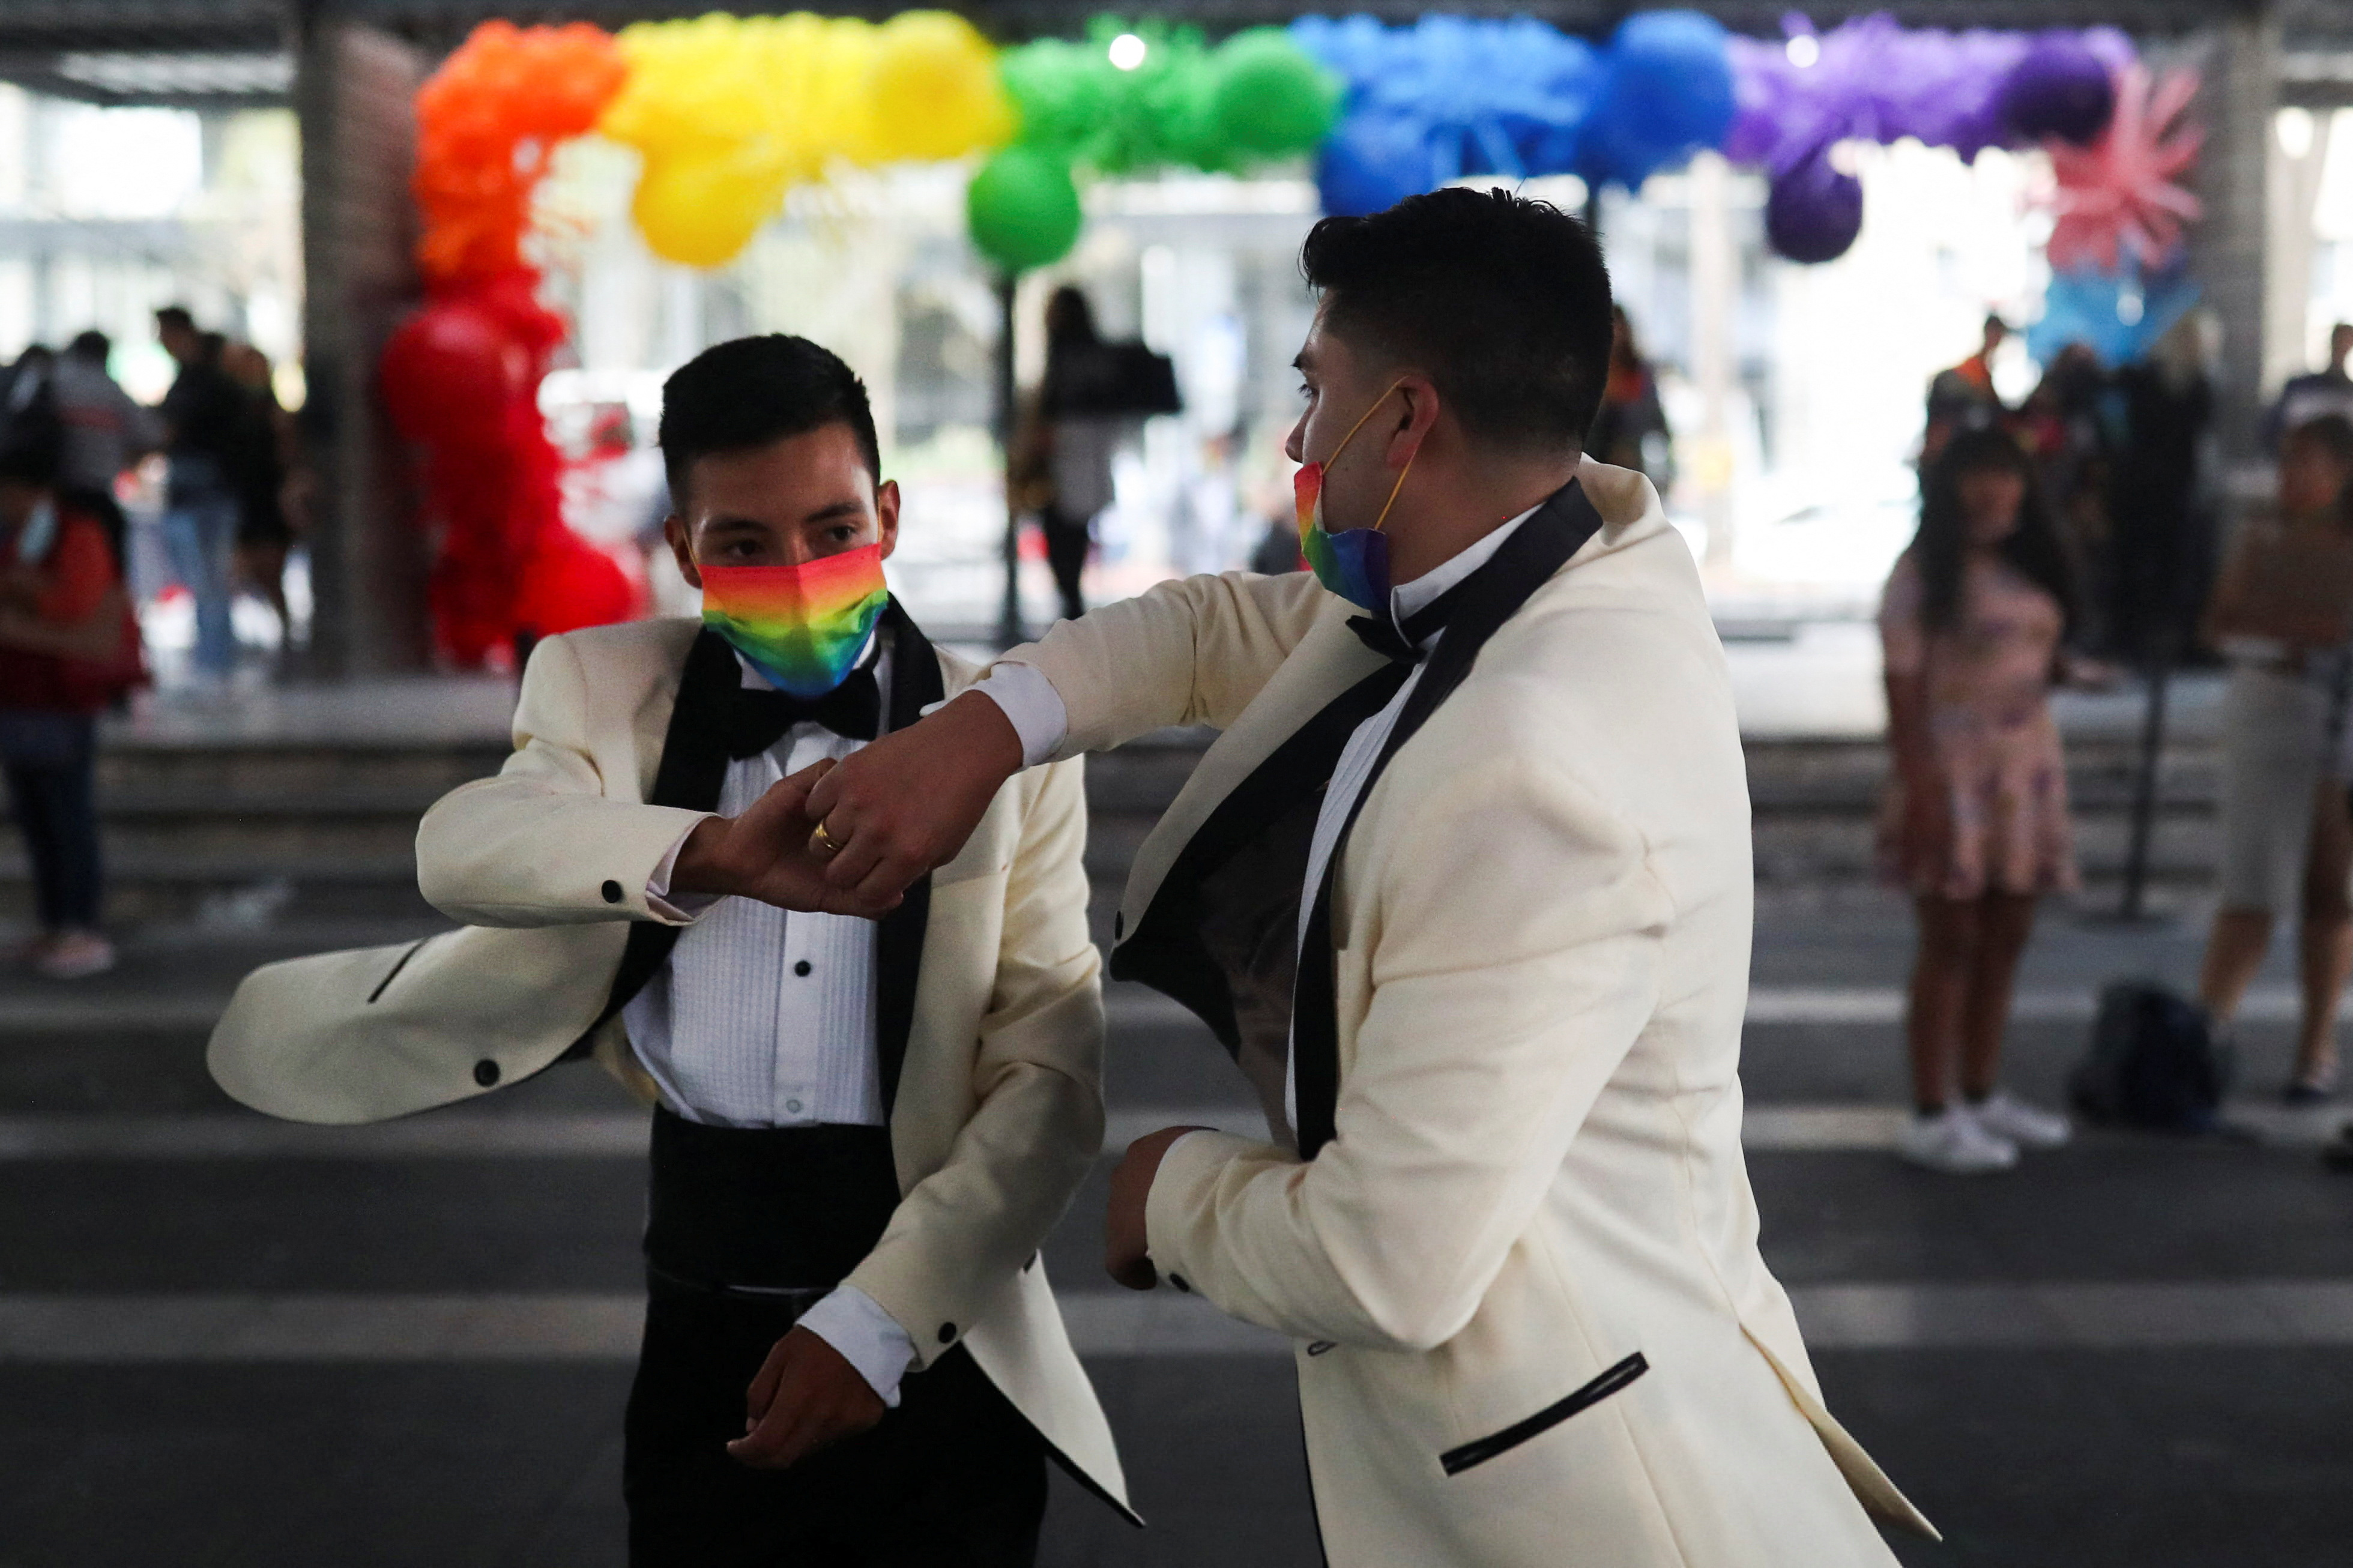 Mexicans celebrate LGBTQ+ pride month with massive wedding